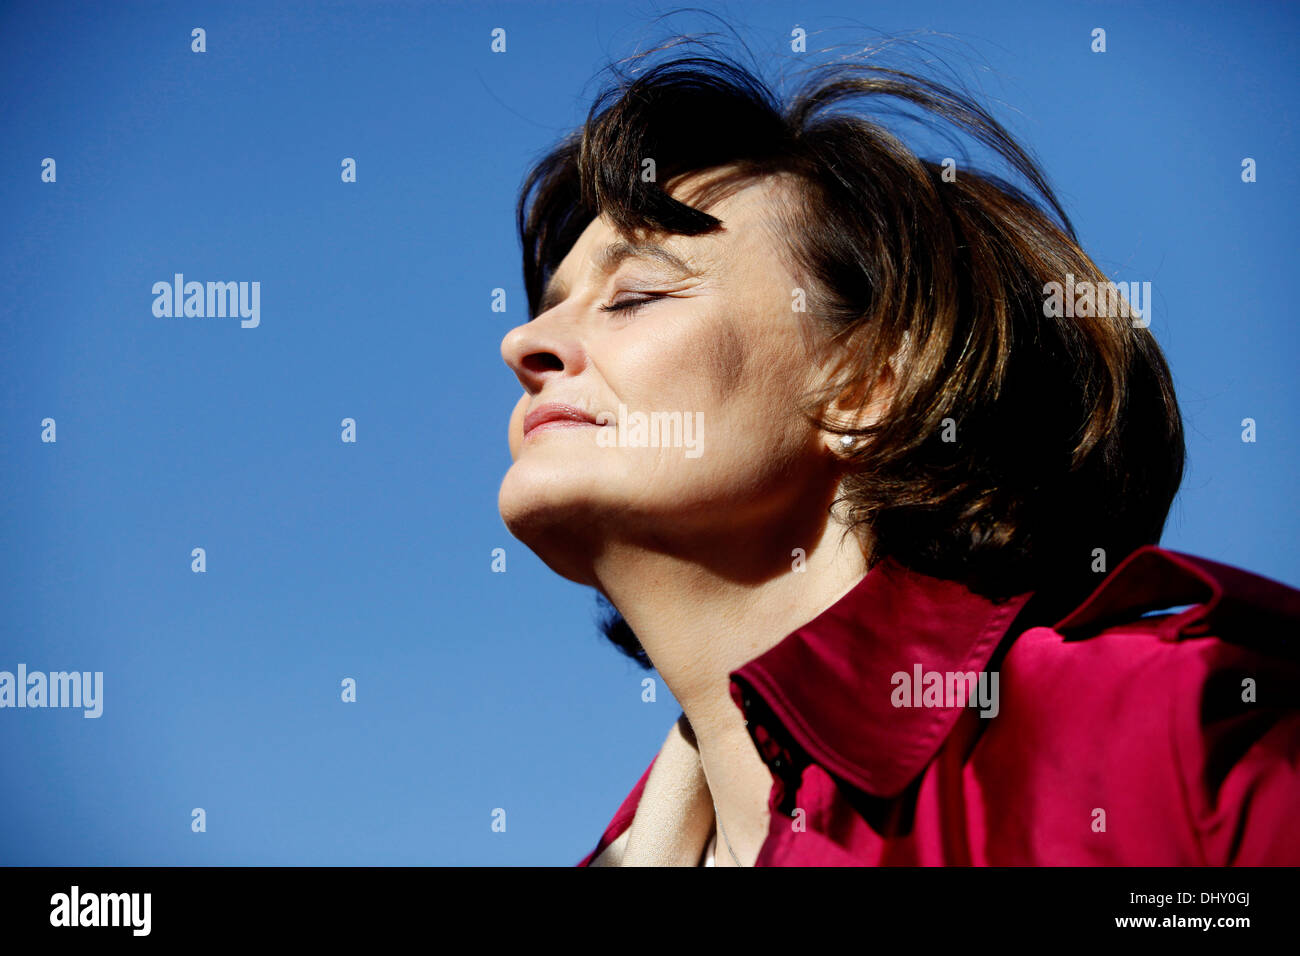 Cherie Blair Is seen during a photos call to promote annual event which sees women around the world calling for an end to violen Stock Photo